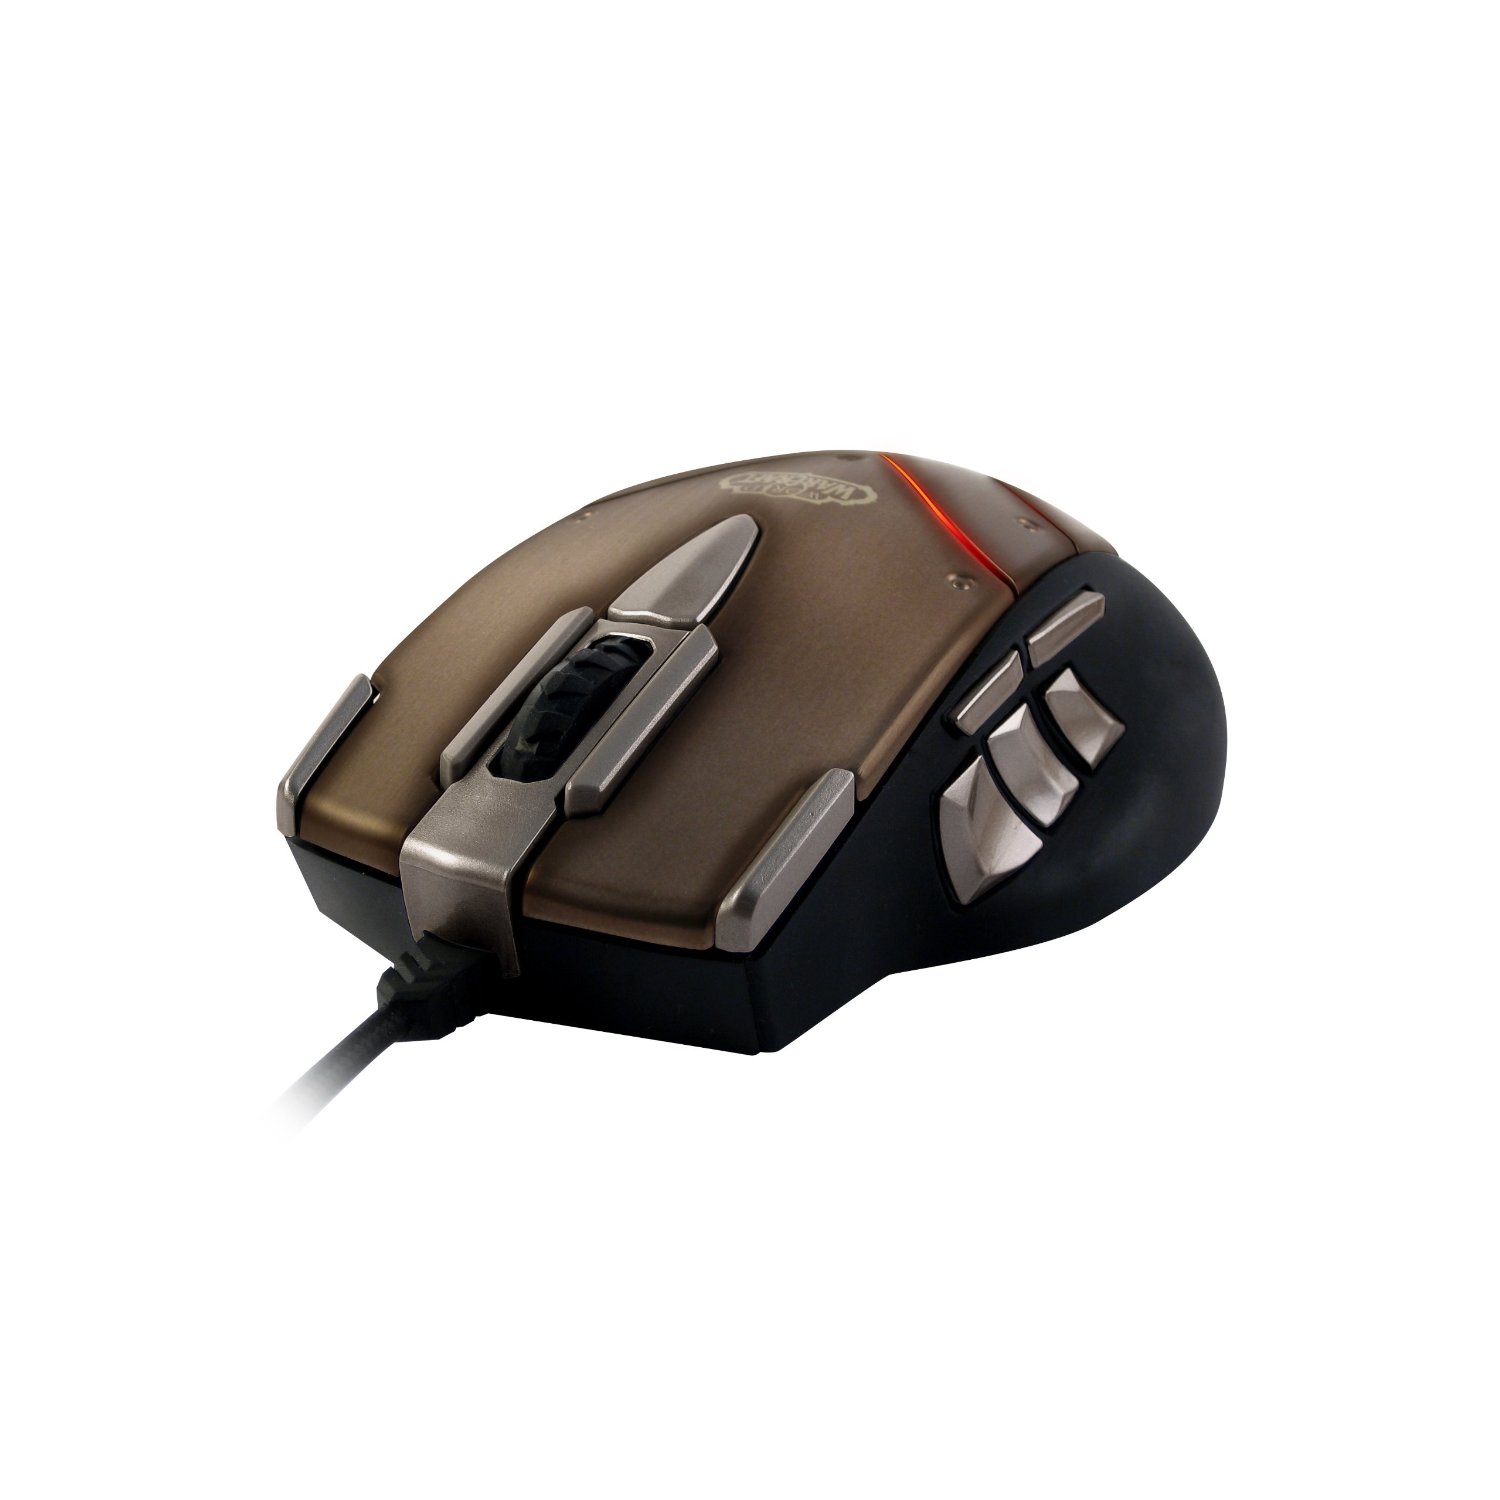 update steelseries wow mouse